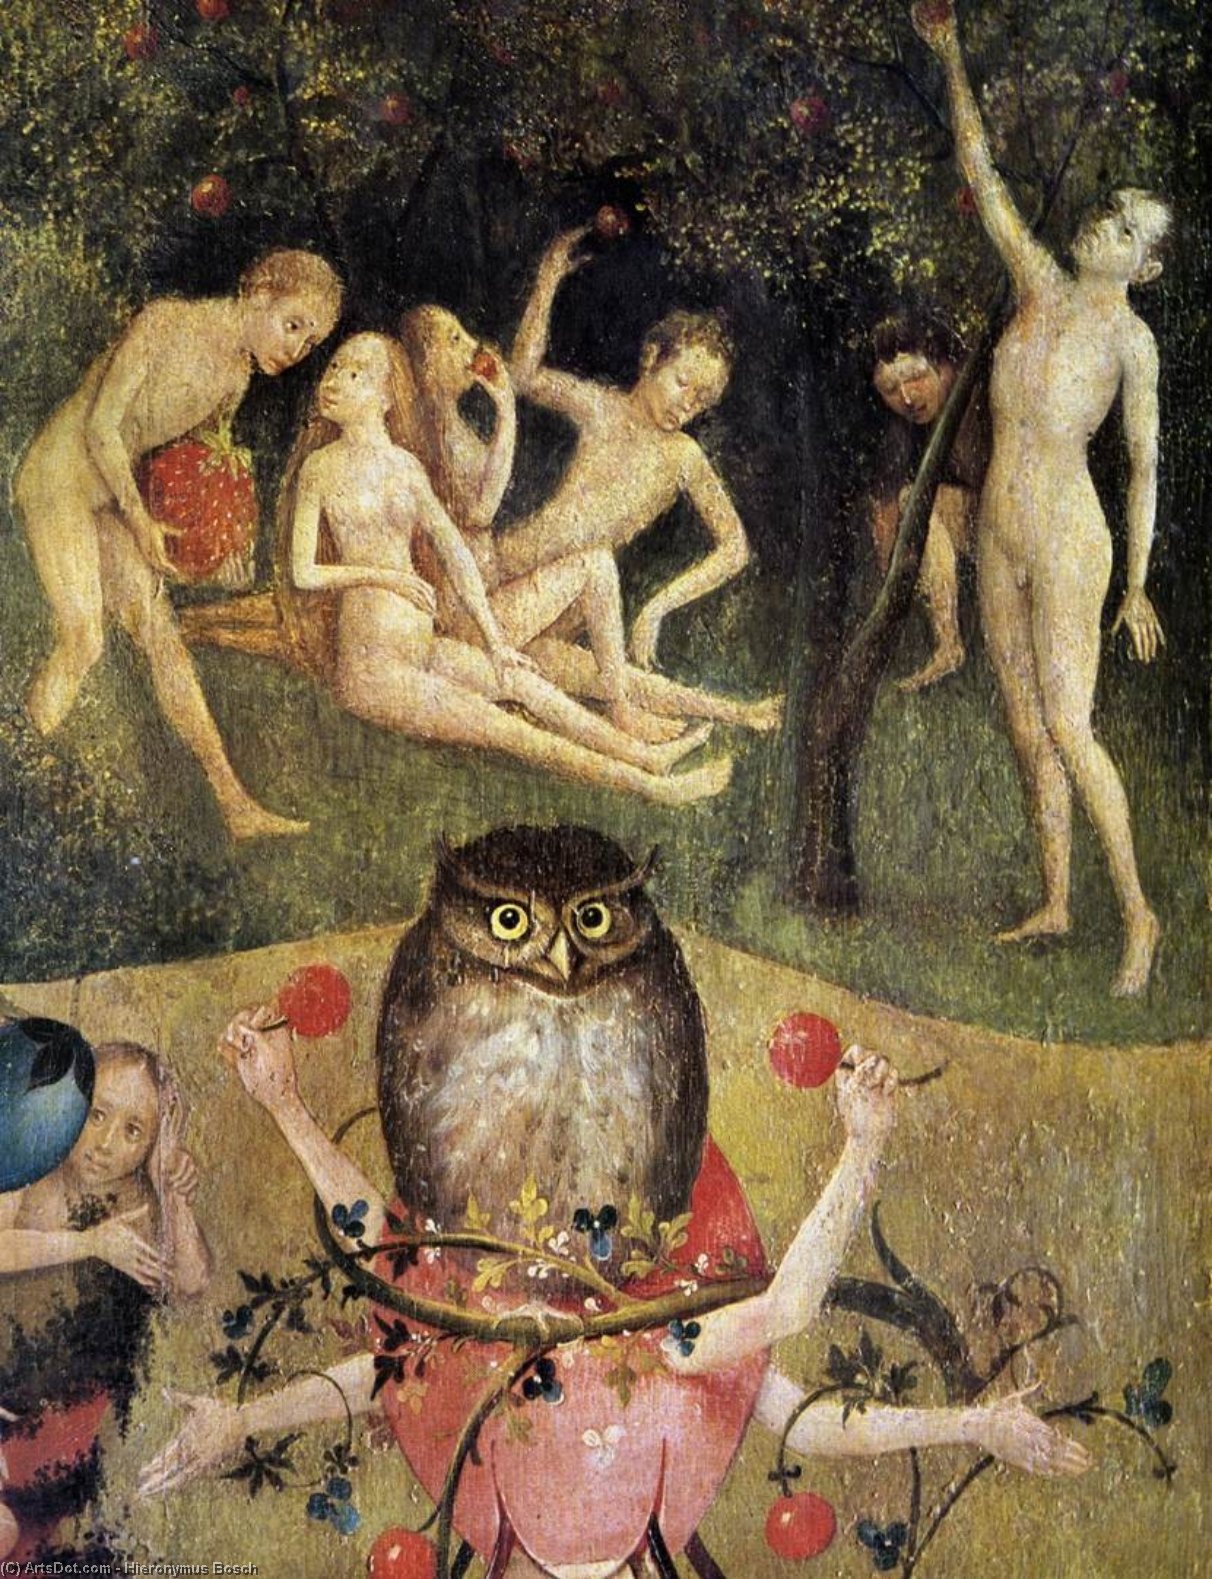 WikiOO.org - Encyclopedia of Fine Arts - Lukisan, Artwork Hieronymus Bosch - Triptych of Garden of Earthly Delights (detail) (48)